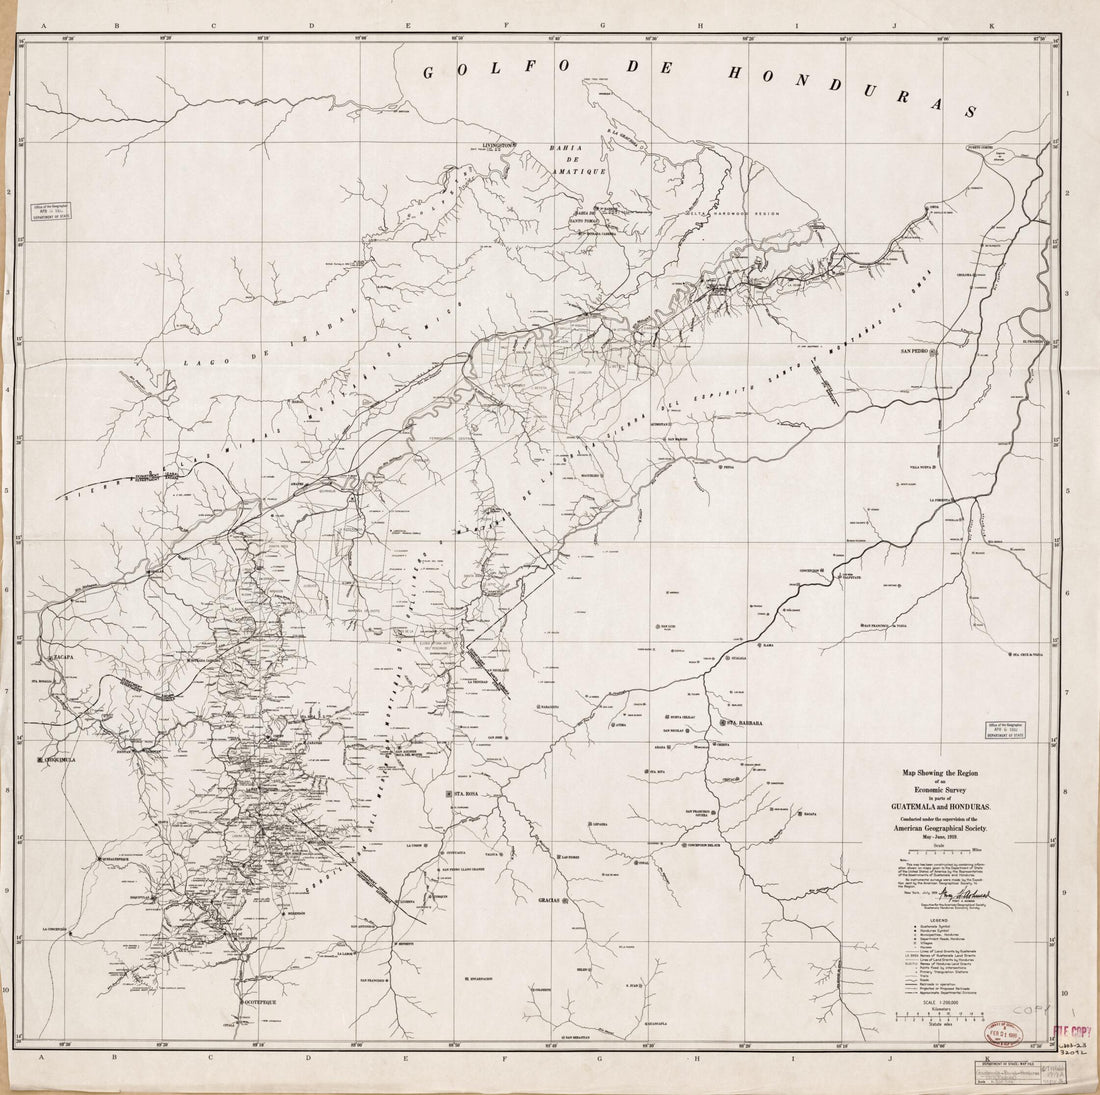 This old map of Sheet 1 - Map Showing the Region of an Economic Survey In Parts of Guatemala and Honduras from Maps of Guatemala-Honduras Boundary. from 1918 was created by  in 1918